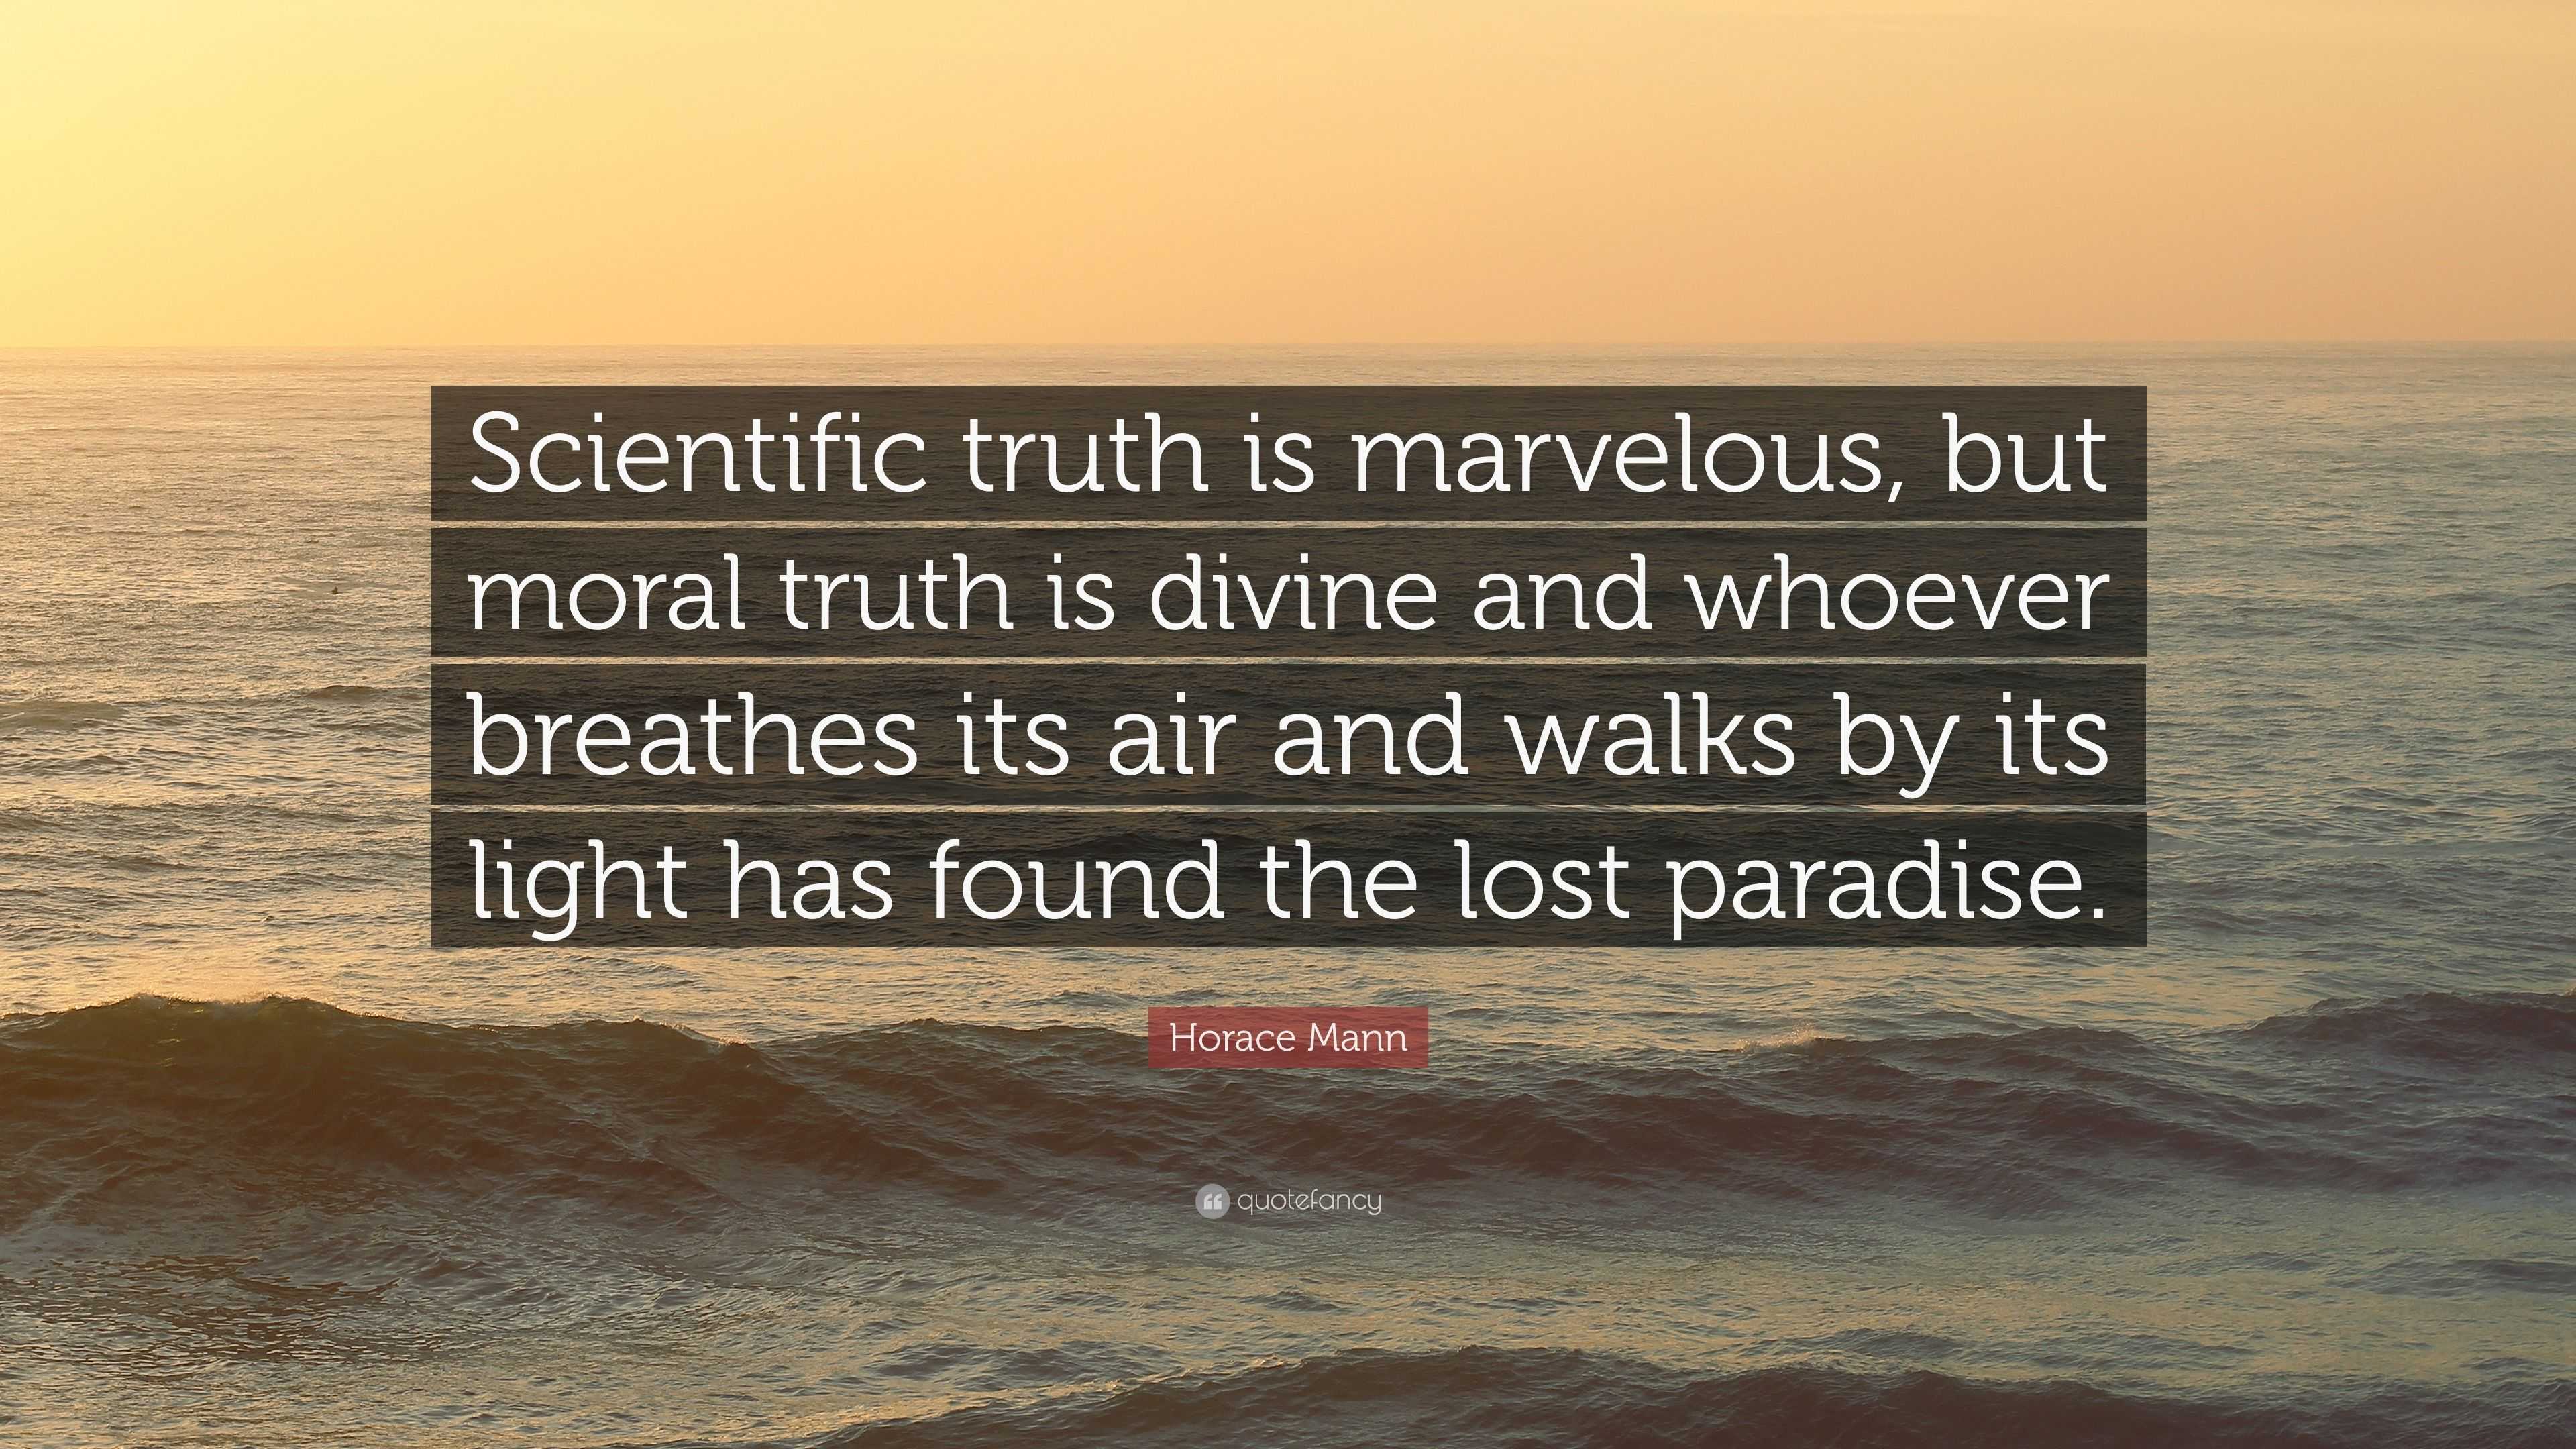 Horace Mann Quote: “Scientific truth is marvelous, but moral truth is ...